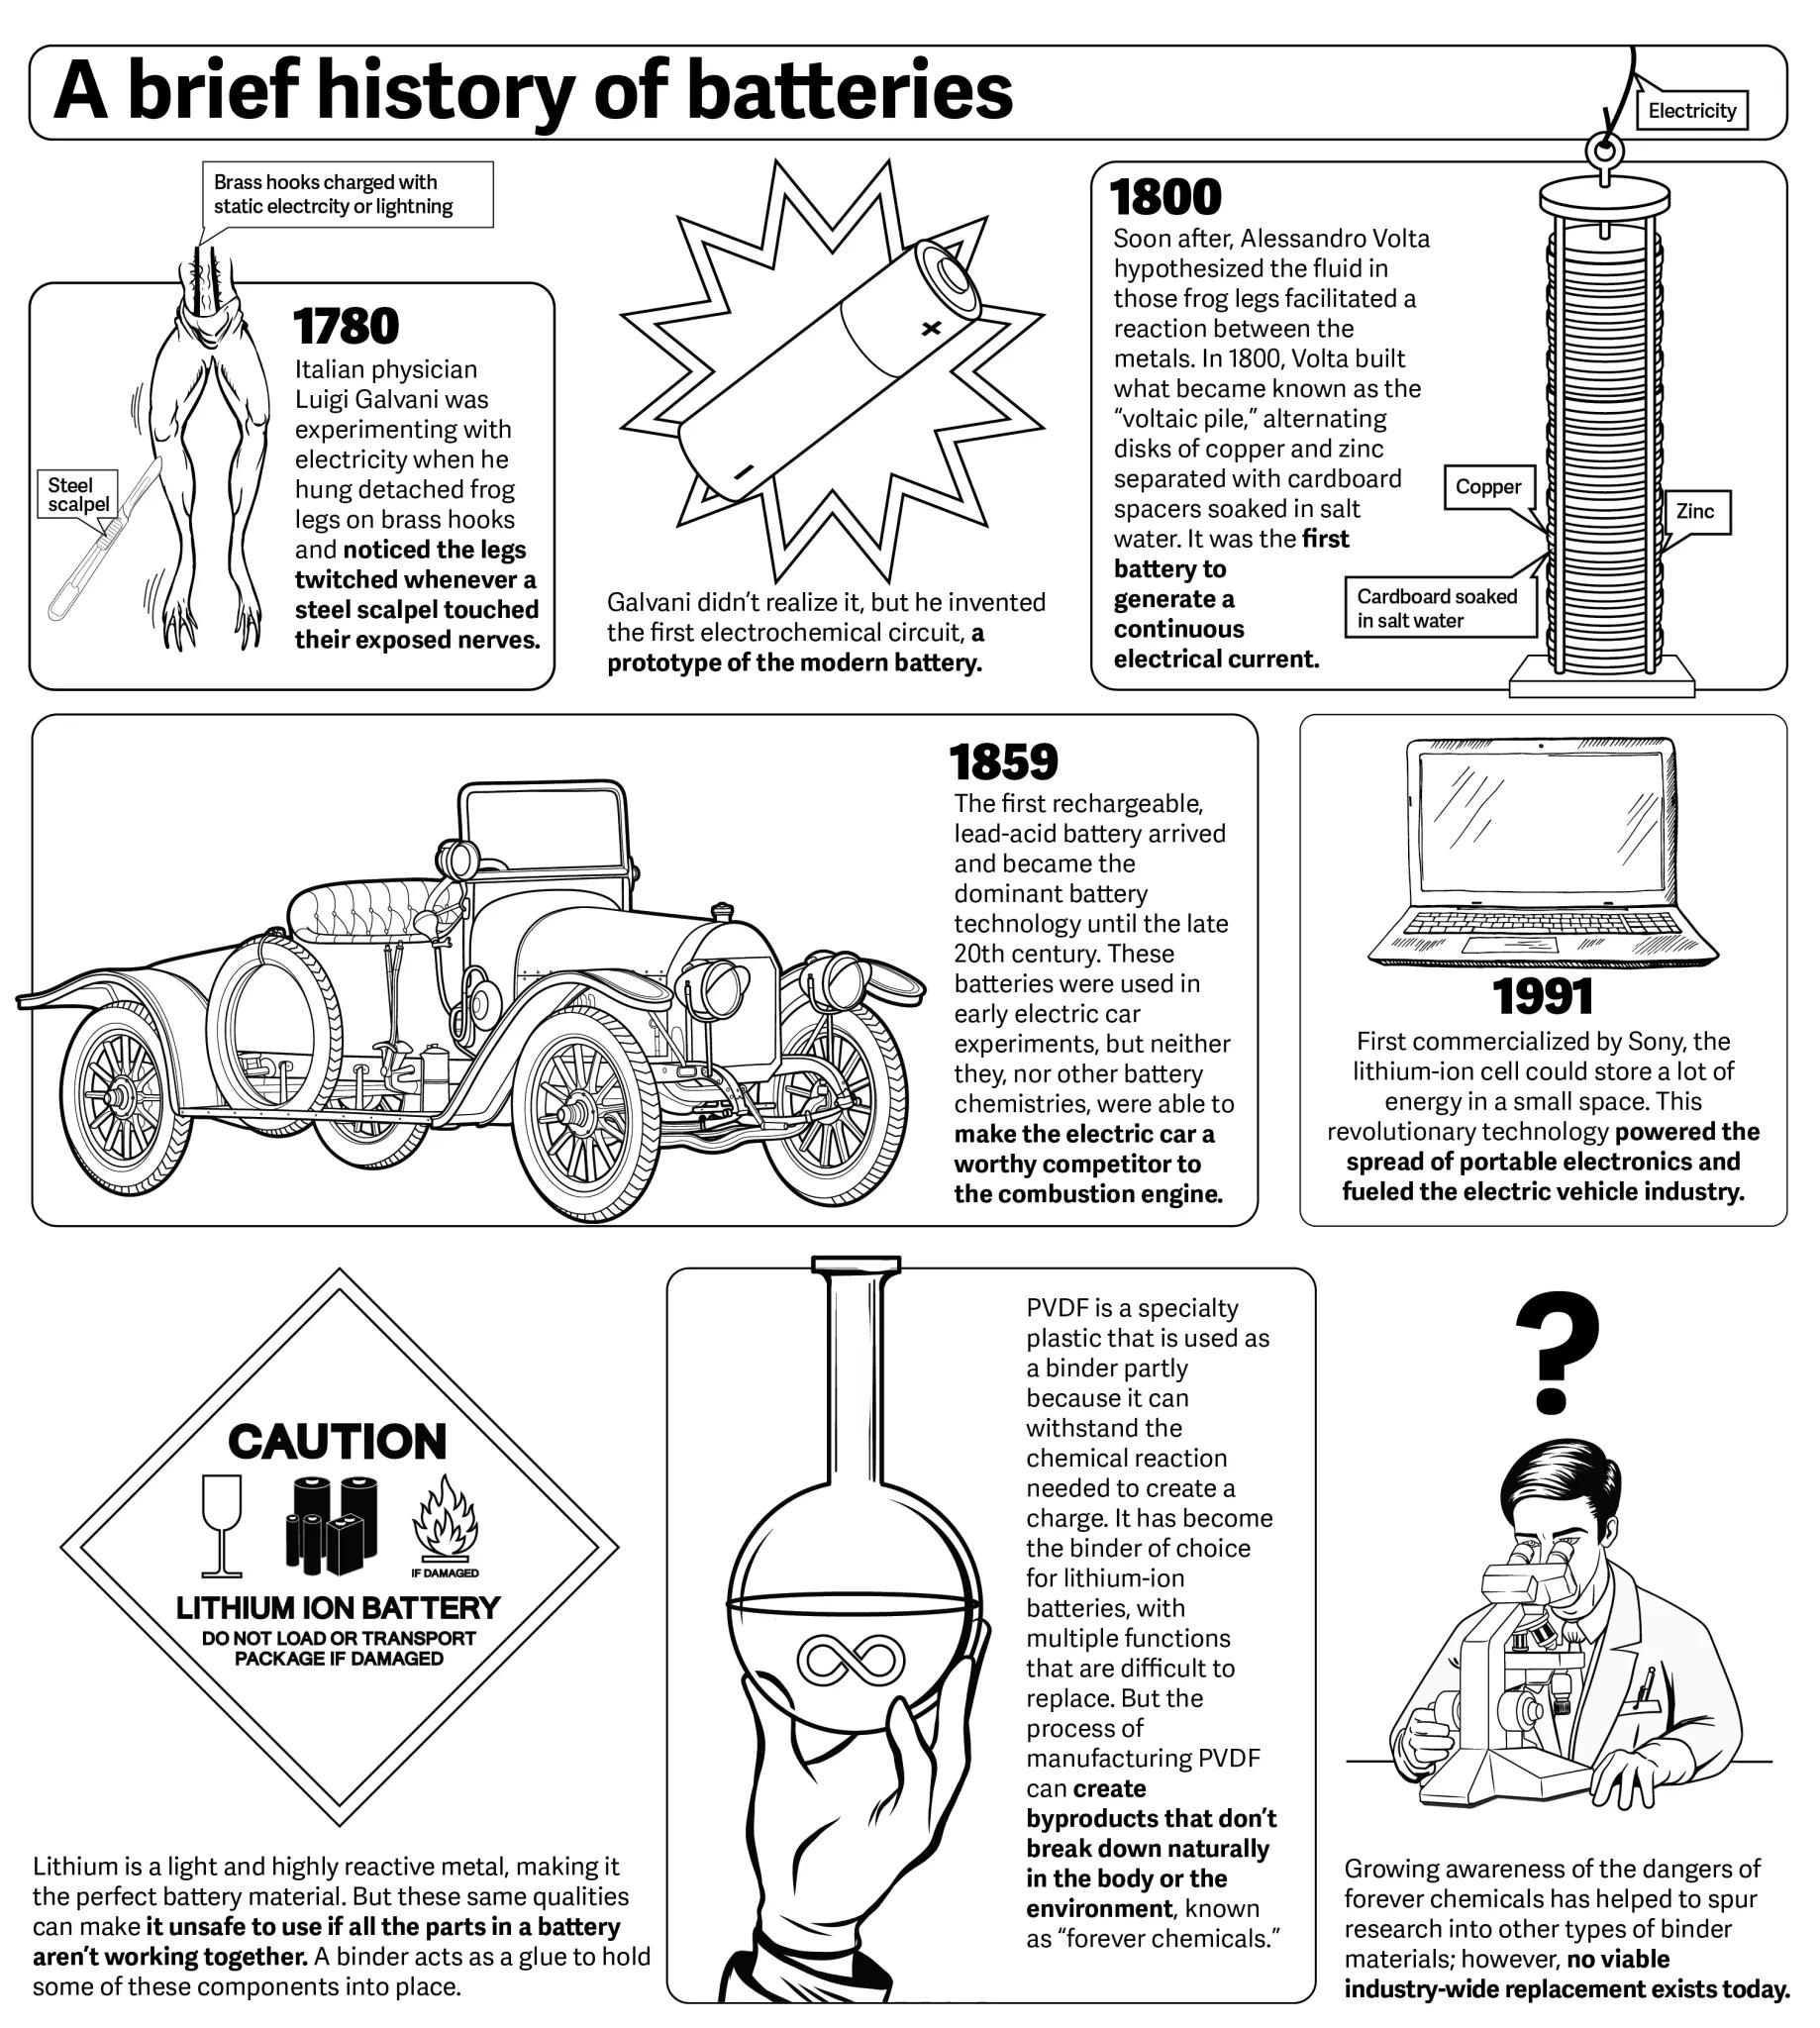 A black and white infographic shows the history of lithium ion batteries from the 1700s to today.